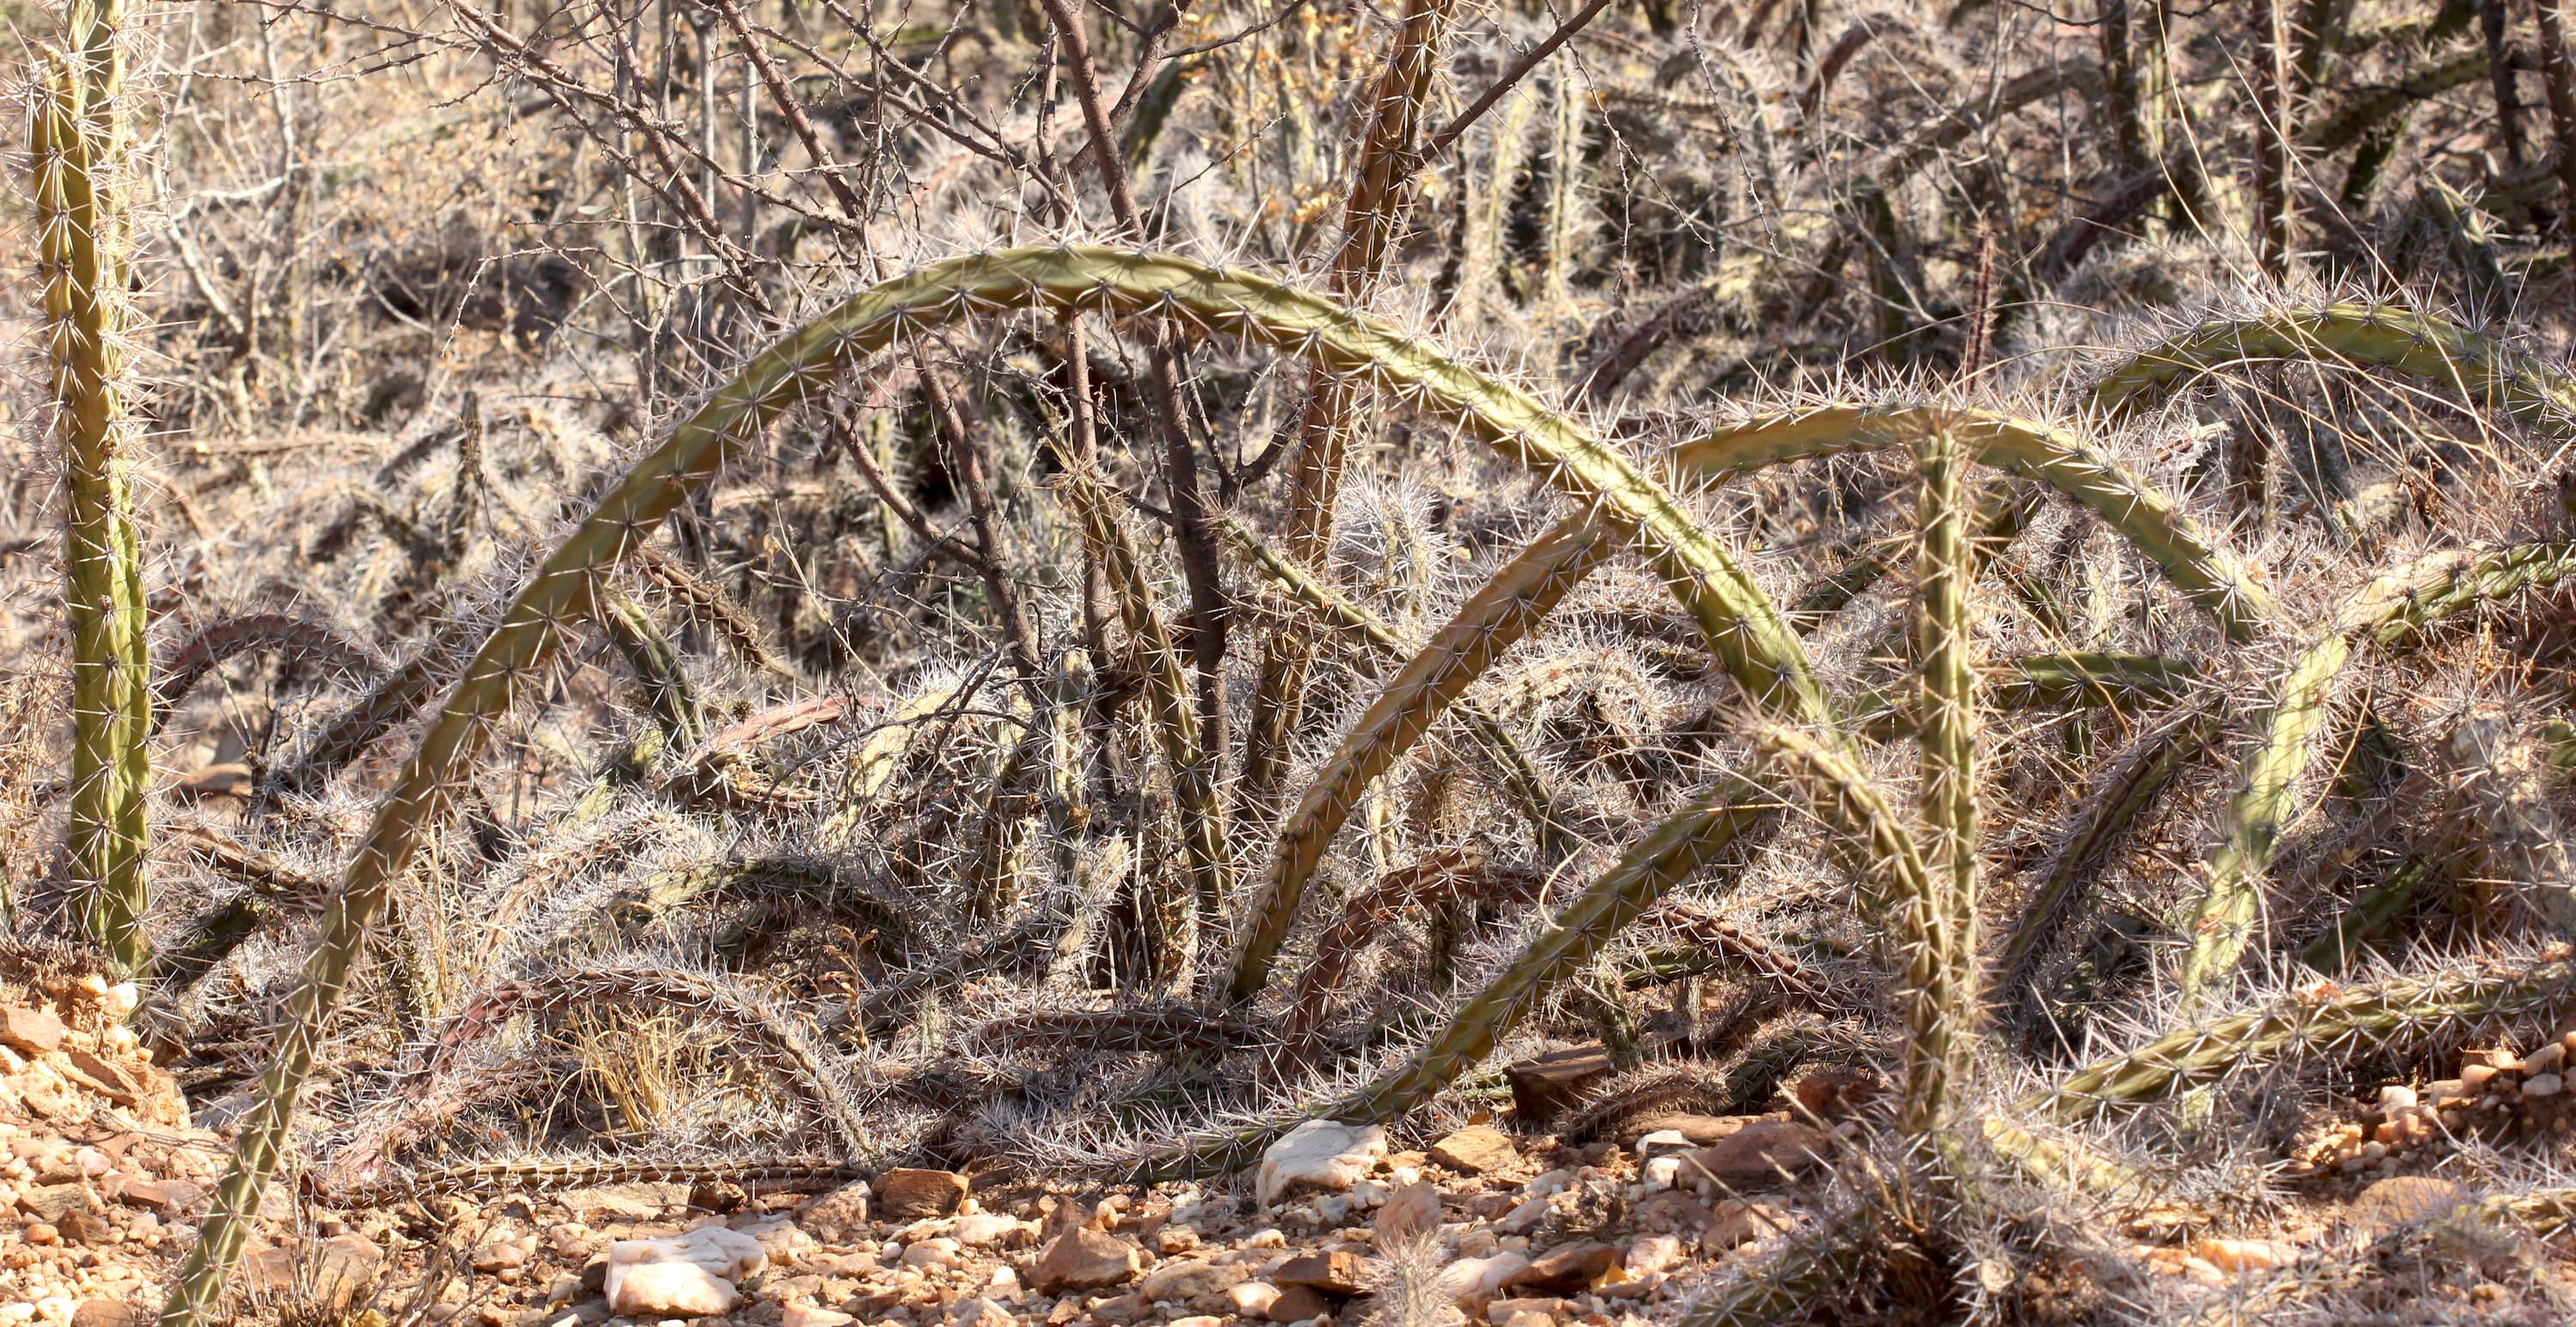 A dense thicket of visciously thorned cactii.